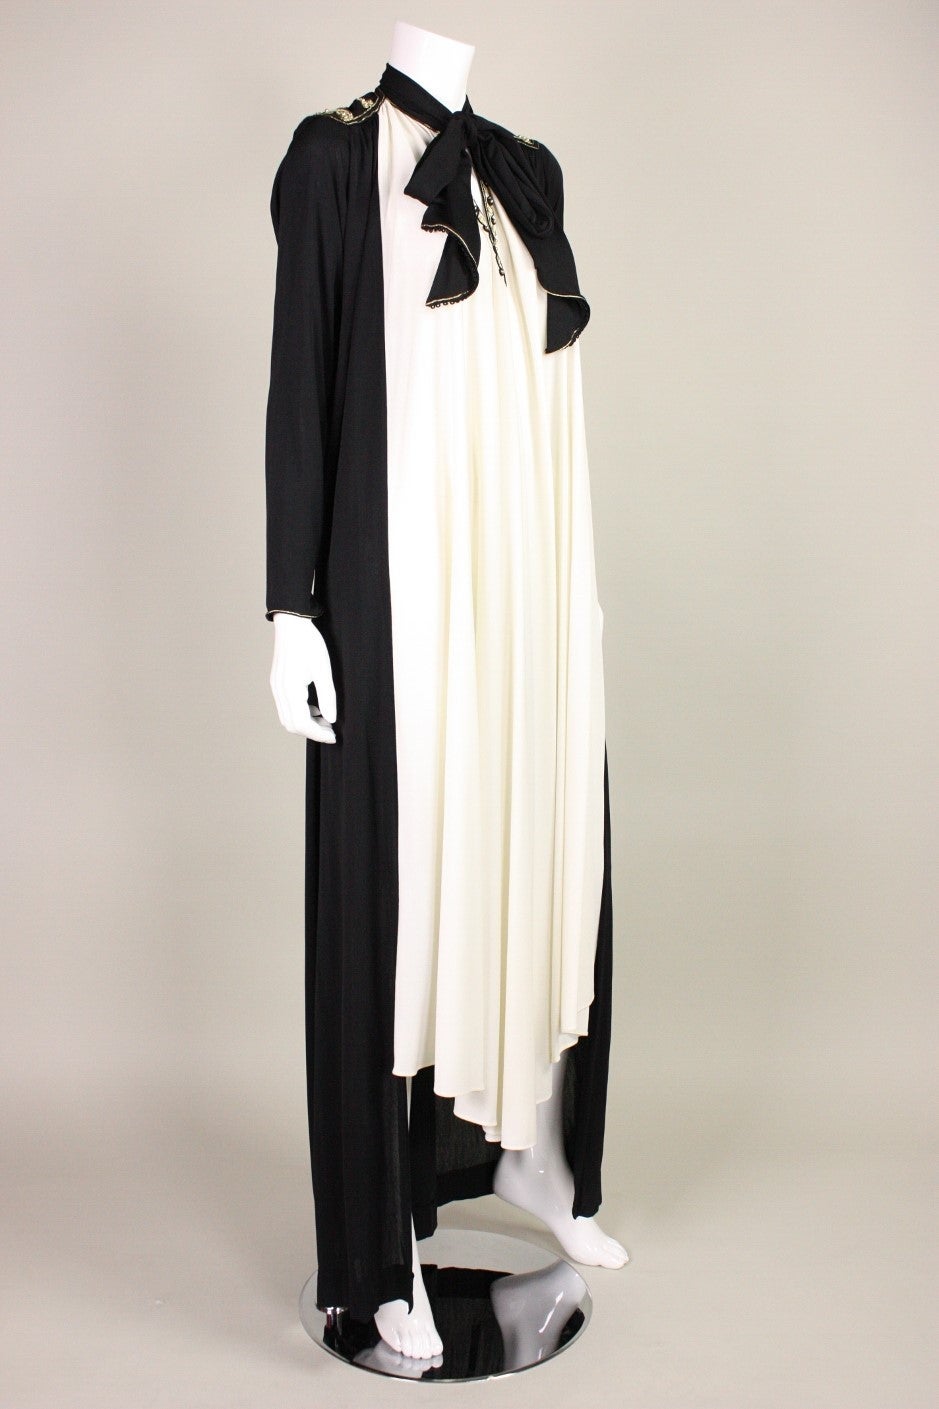 Vintage dress by Fakhita Sebti is made out of black and cream matte jersey.  Gold soutache detailing at center front neck and shoulders.  Center front tie at neck.  No closures.  Unlined.  Can be worn with or without gold belt (as shown).

No size